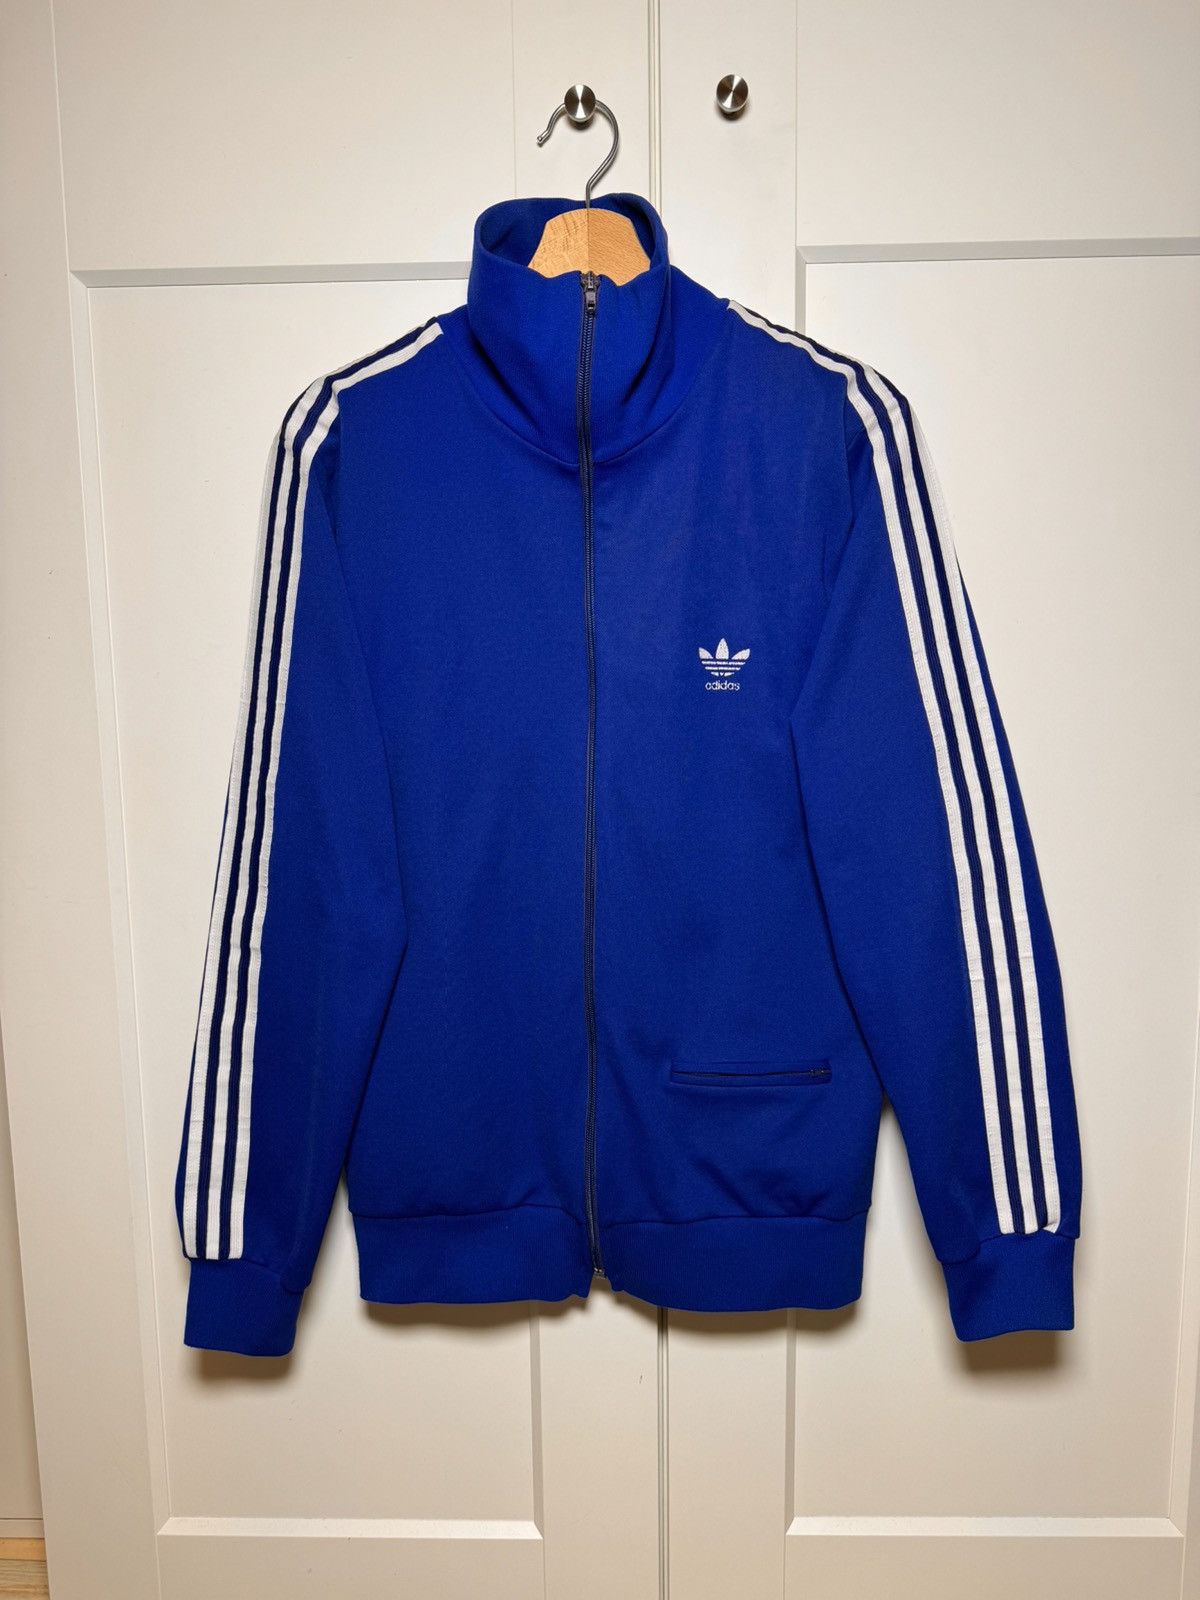 Adidas Adidas 70s Track Top Olympic Jacket Size US L / EU 52-54 / 3 - 1 Preview